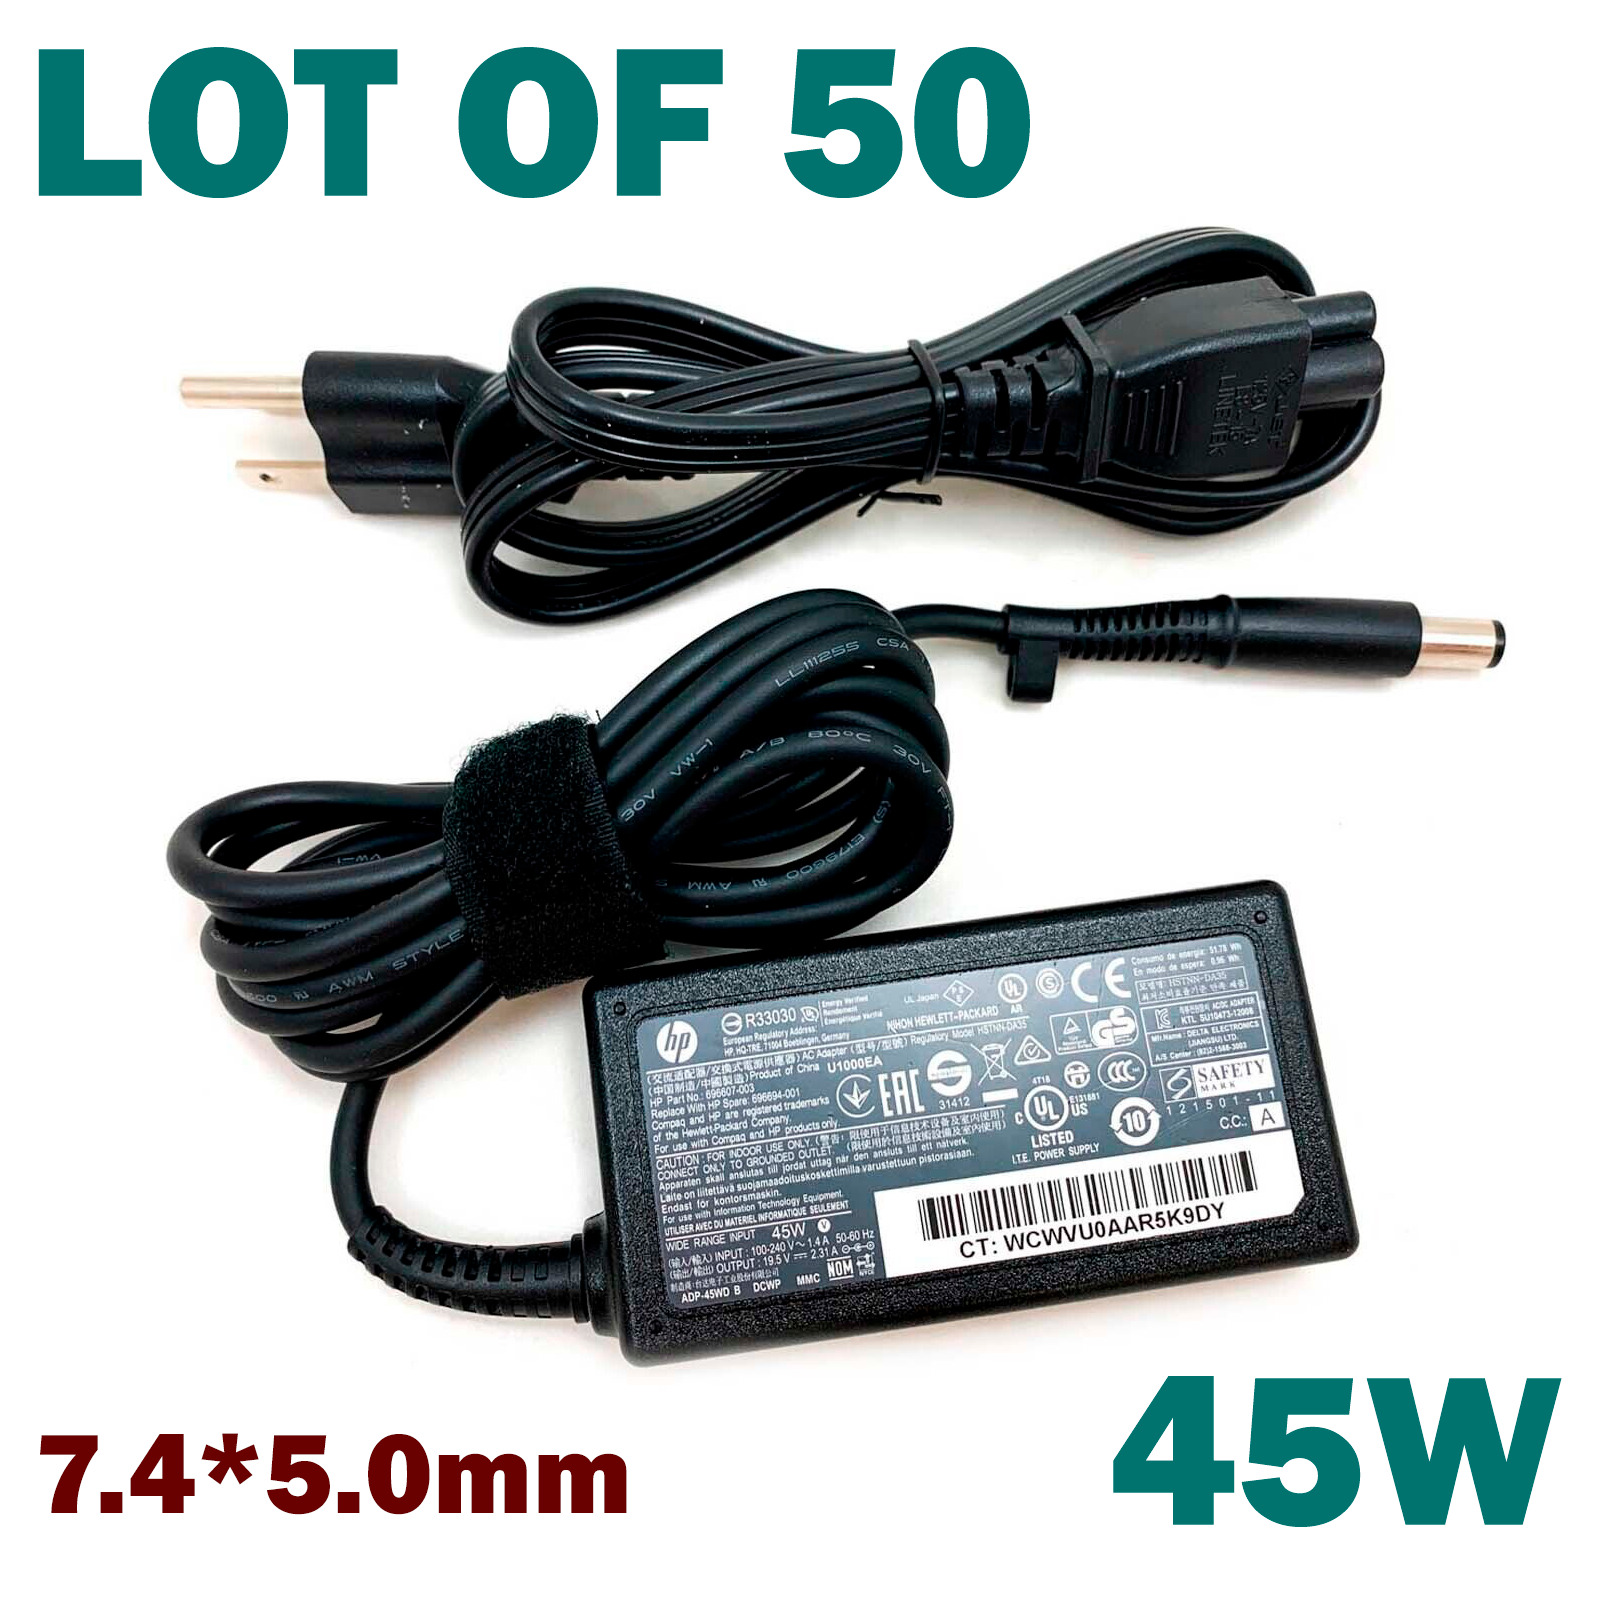 Lot of 50 Genuine 45W HP AC Power Supply Adapter 19.5V 2.31A 7.4*5.0mm & Cord